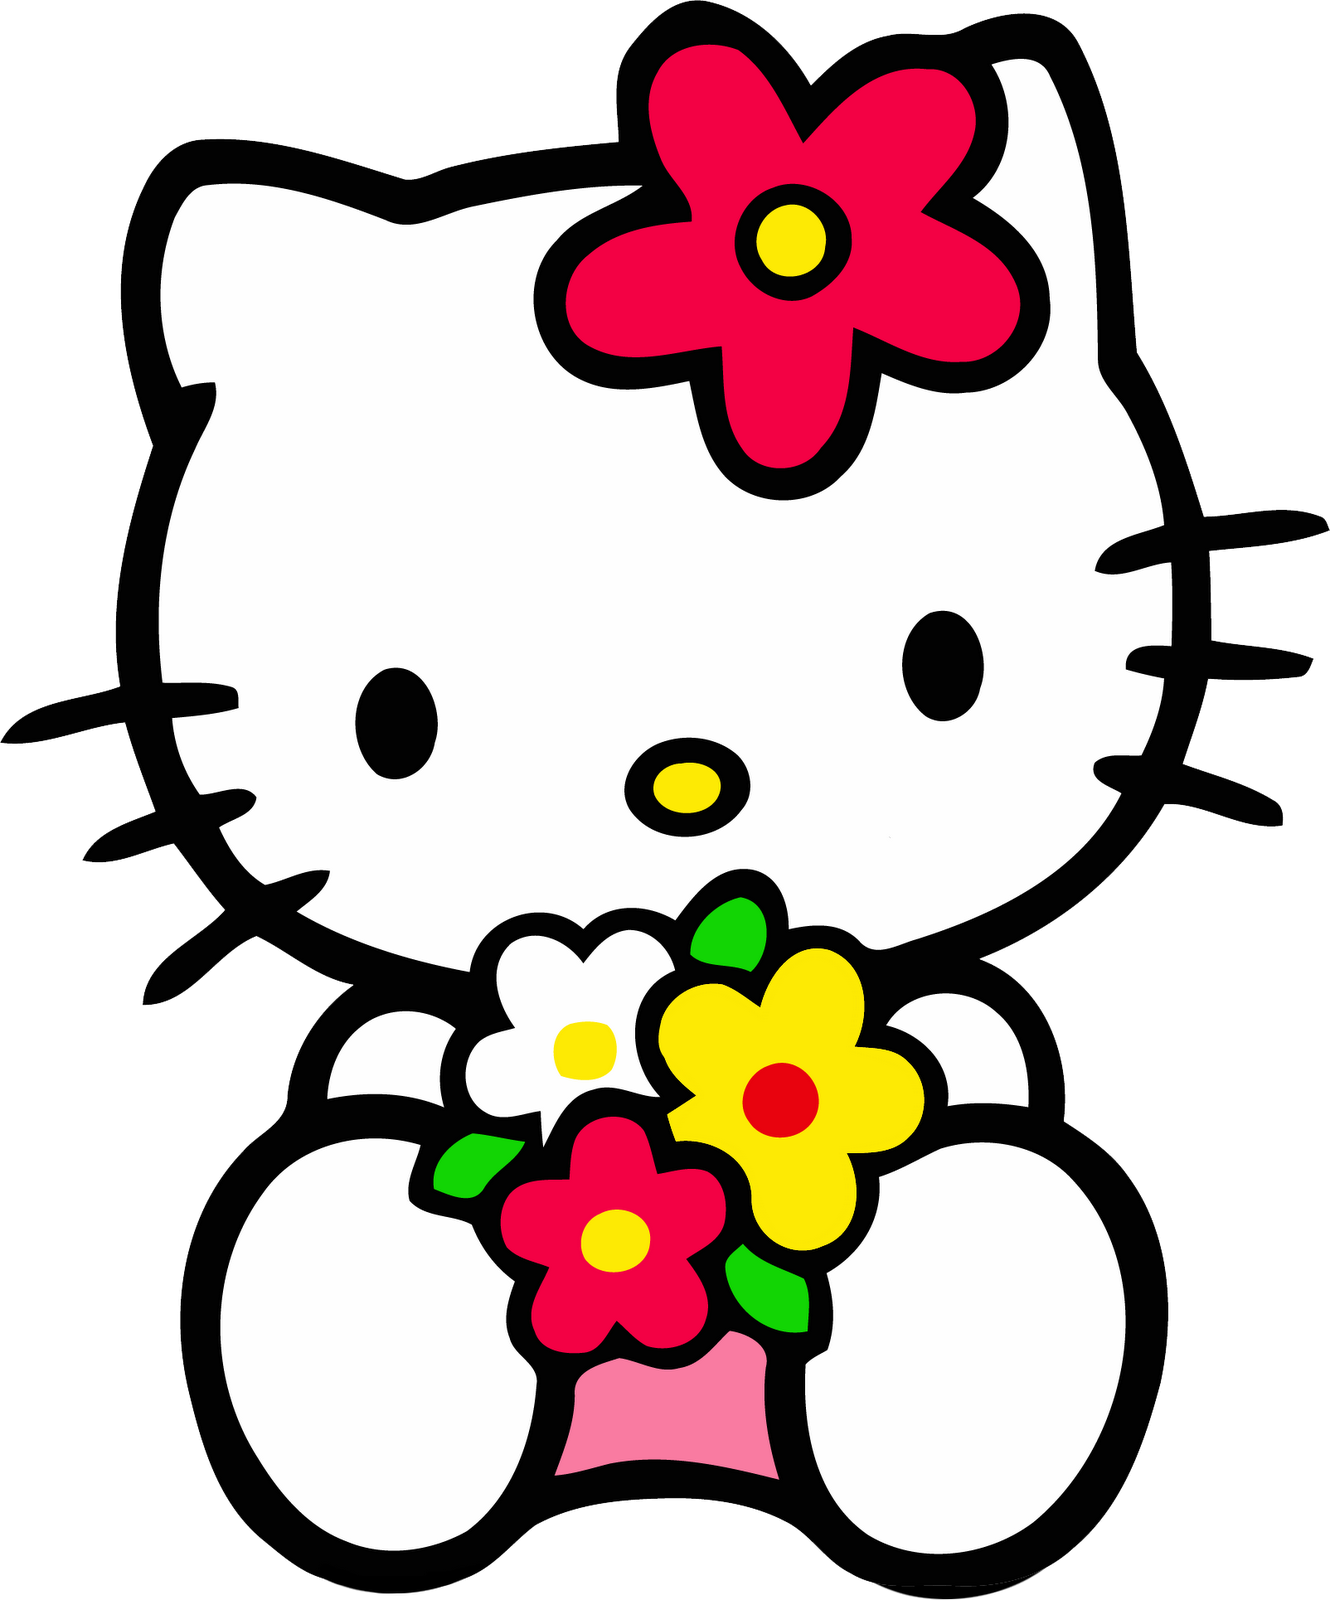 ImagesList.com: Hello Kitty Images, part 2